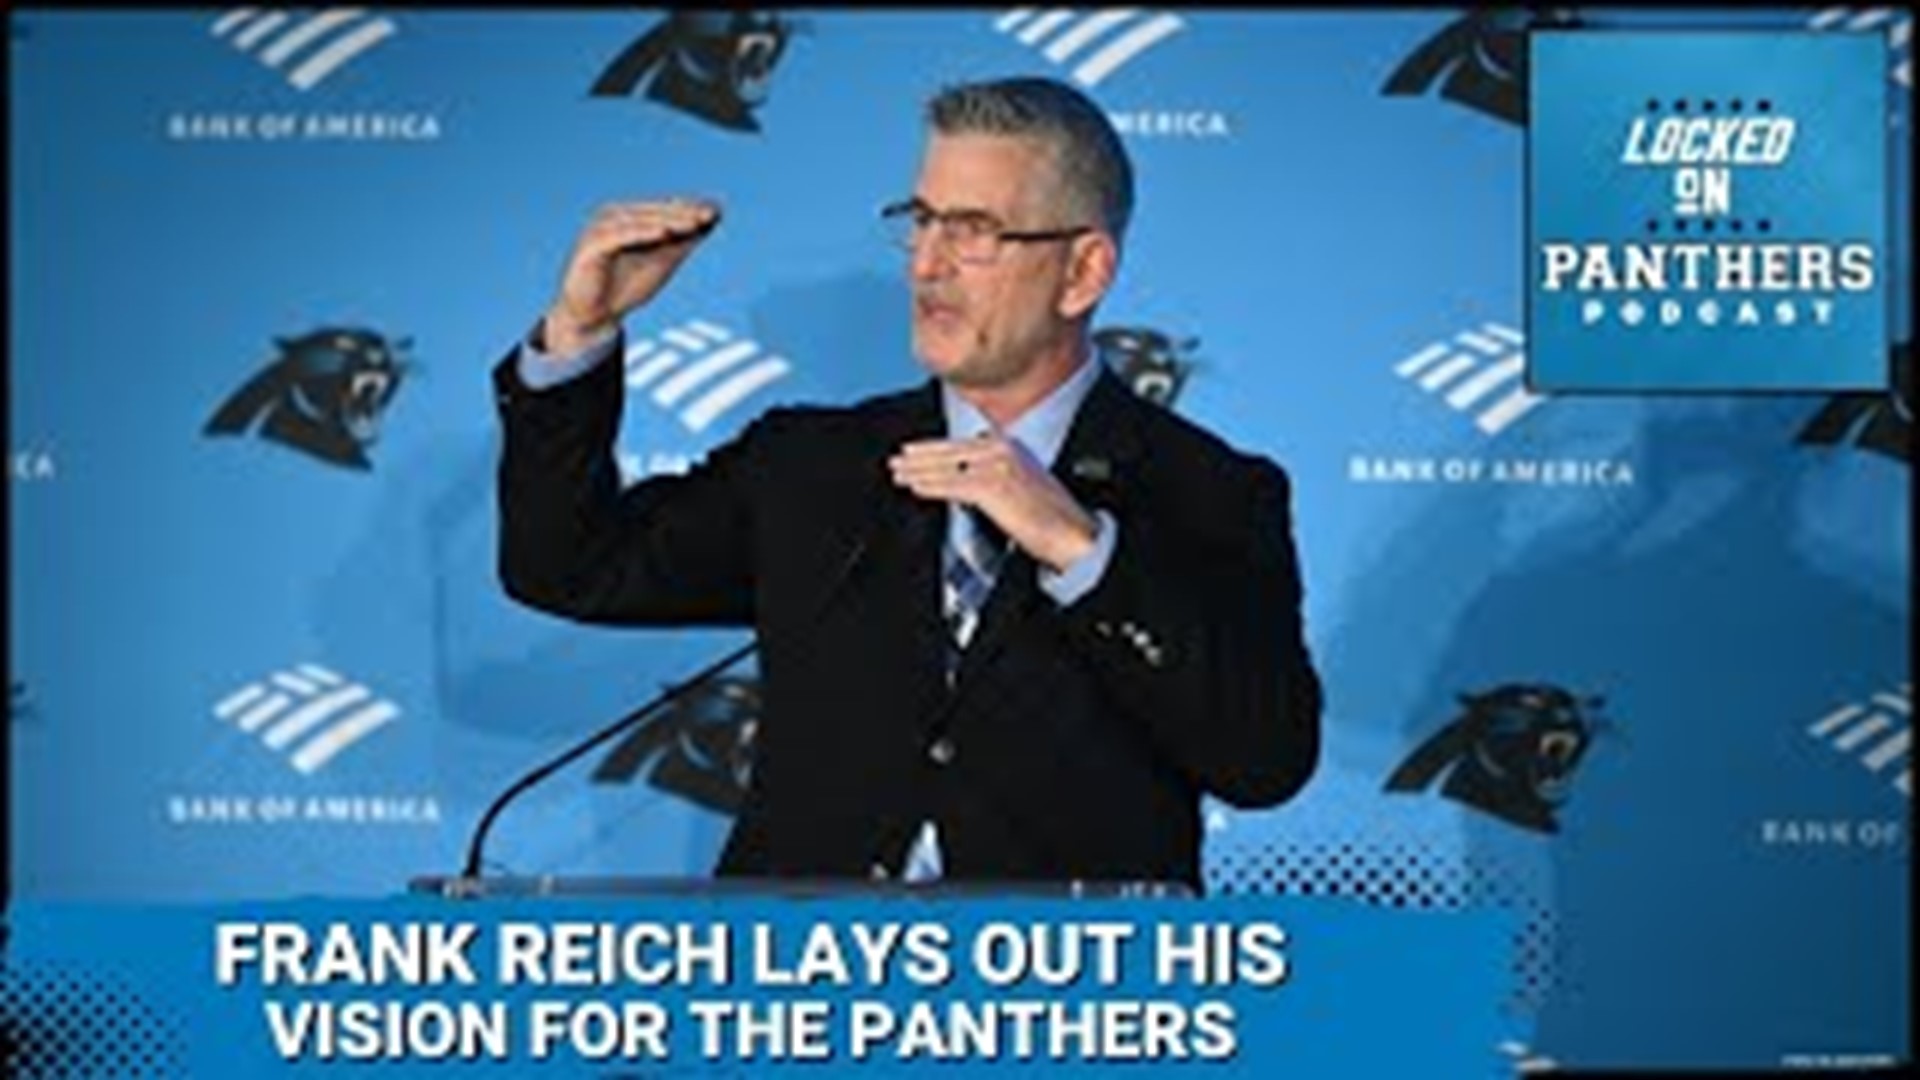 Frank Reich was formally introduced as head coach on Tuesday afternoon where he laid out his vision for the team's future. That and more on Locked On Panthers.